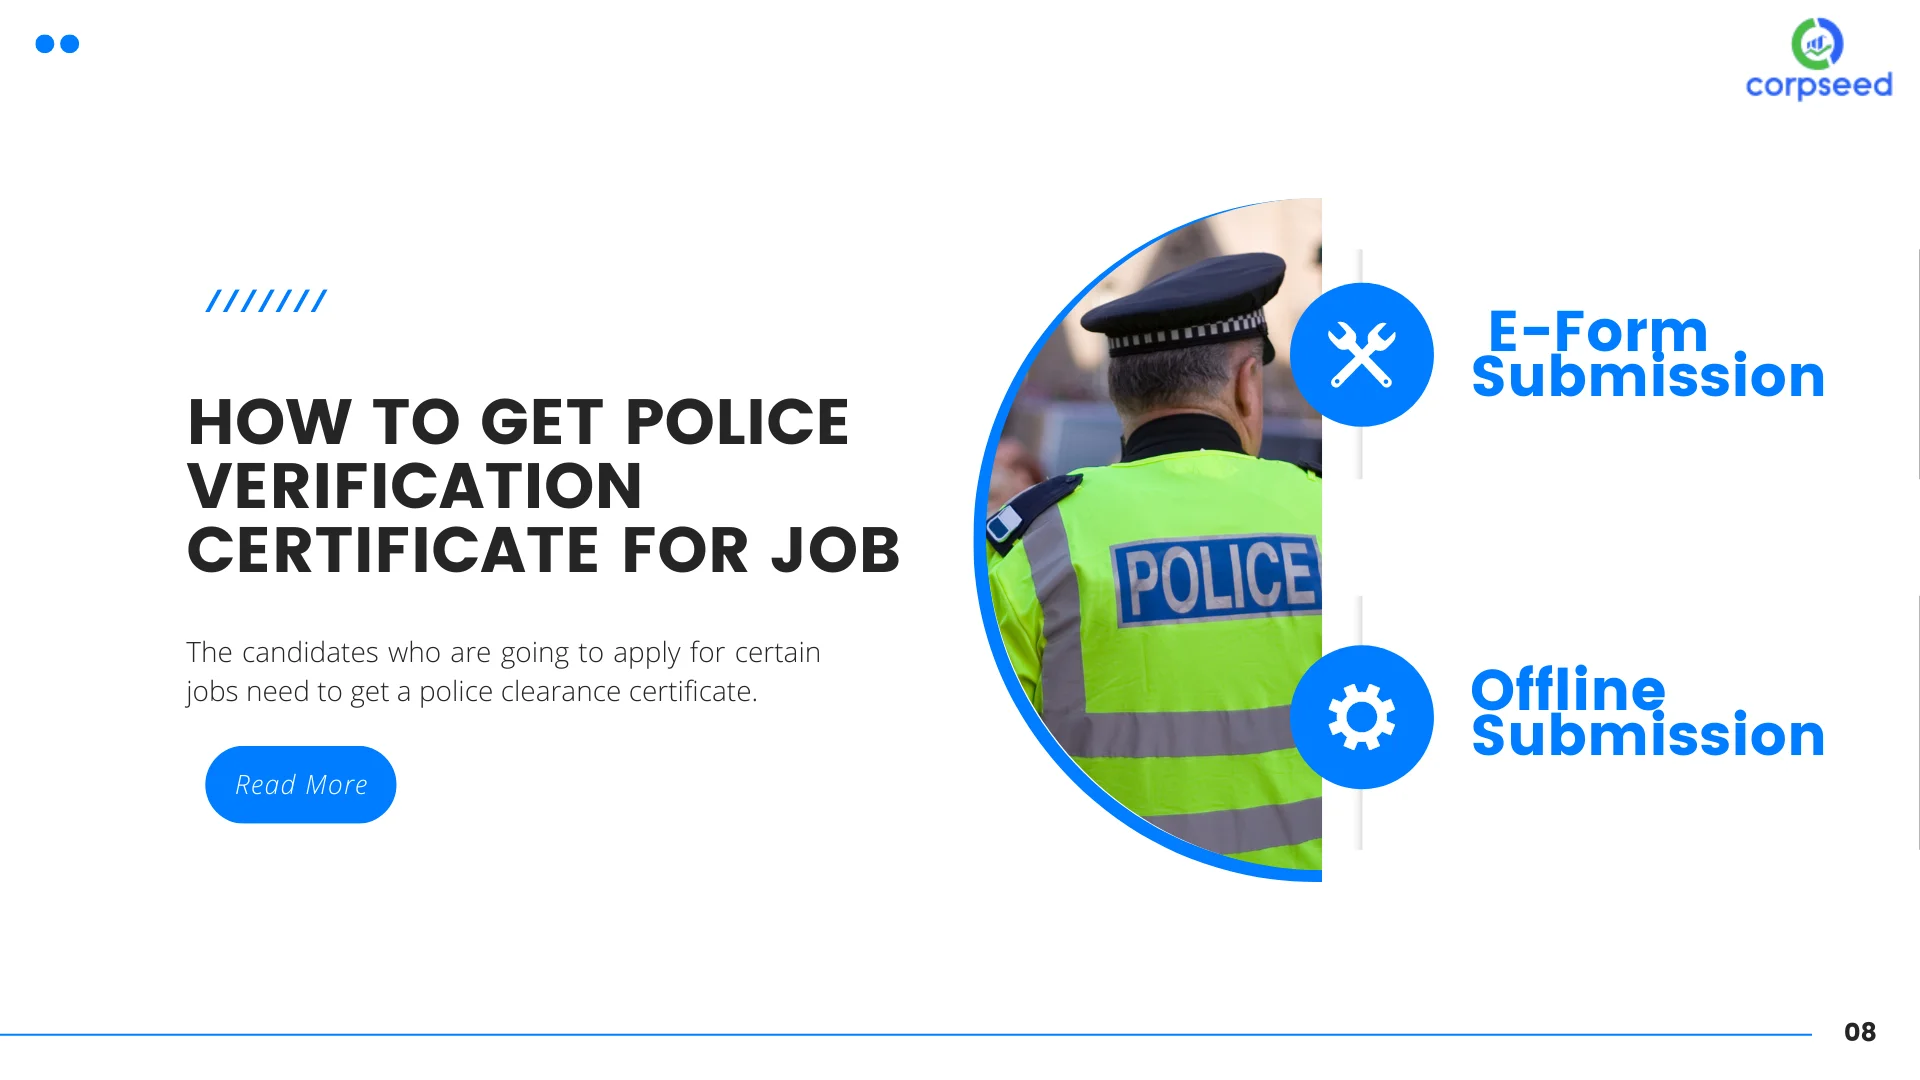 how-to-get-police-verification-certificate-for-job-corpseed.webp